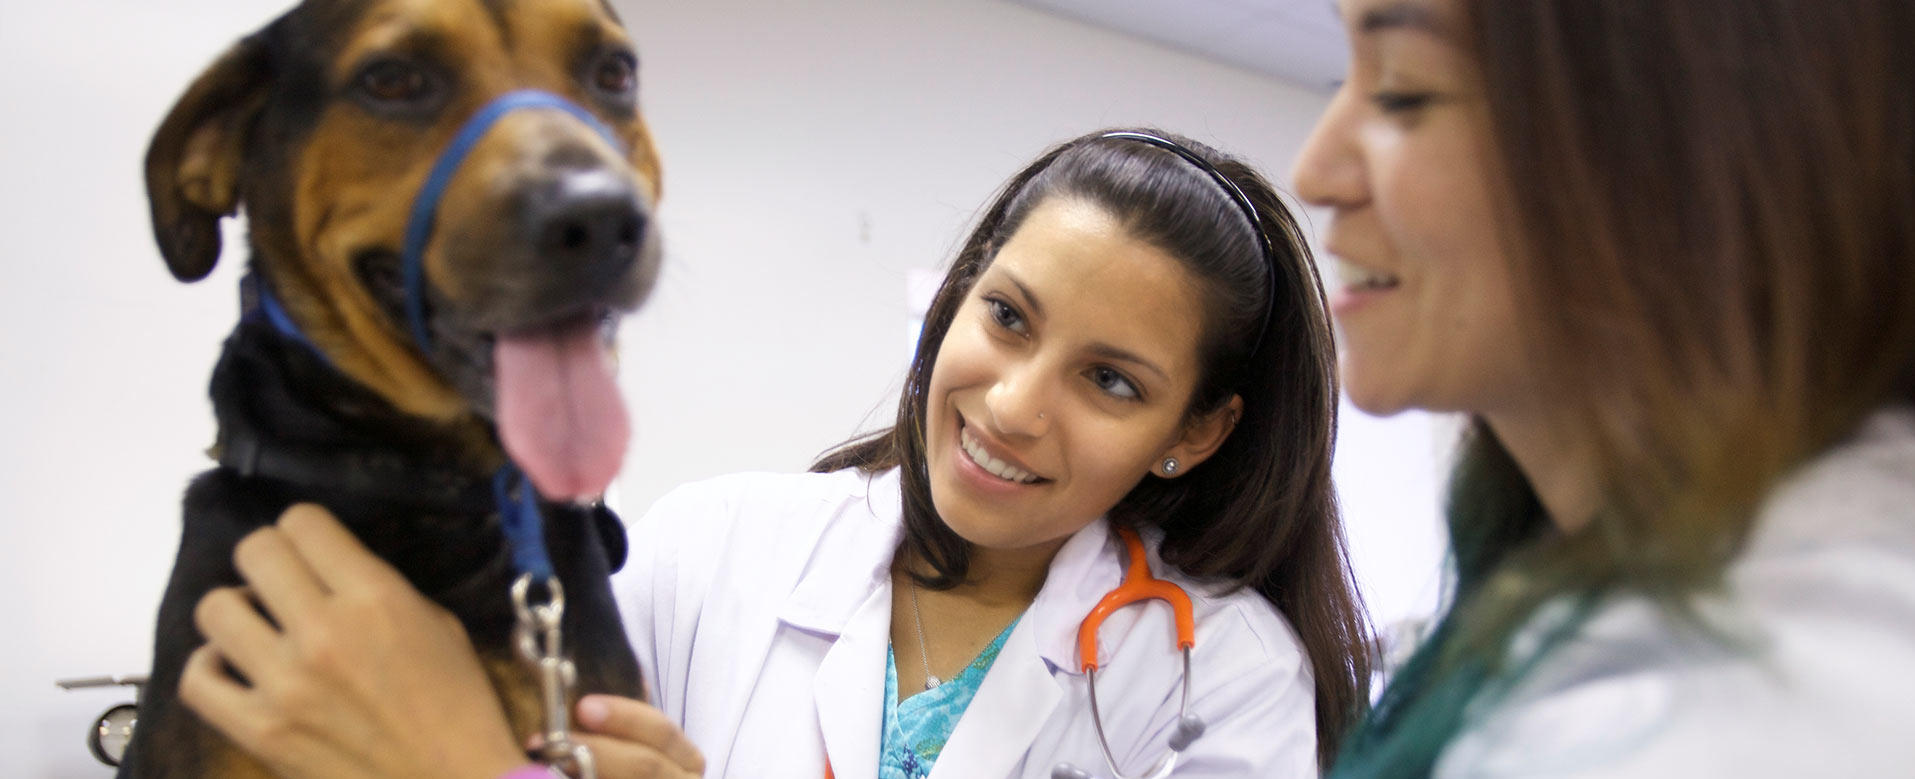 Two veterinarians smiling as they take care of happy dog